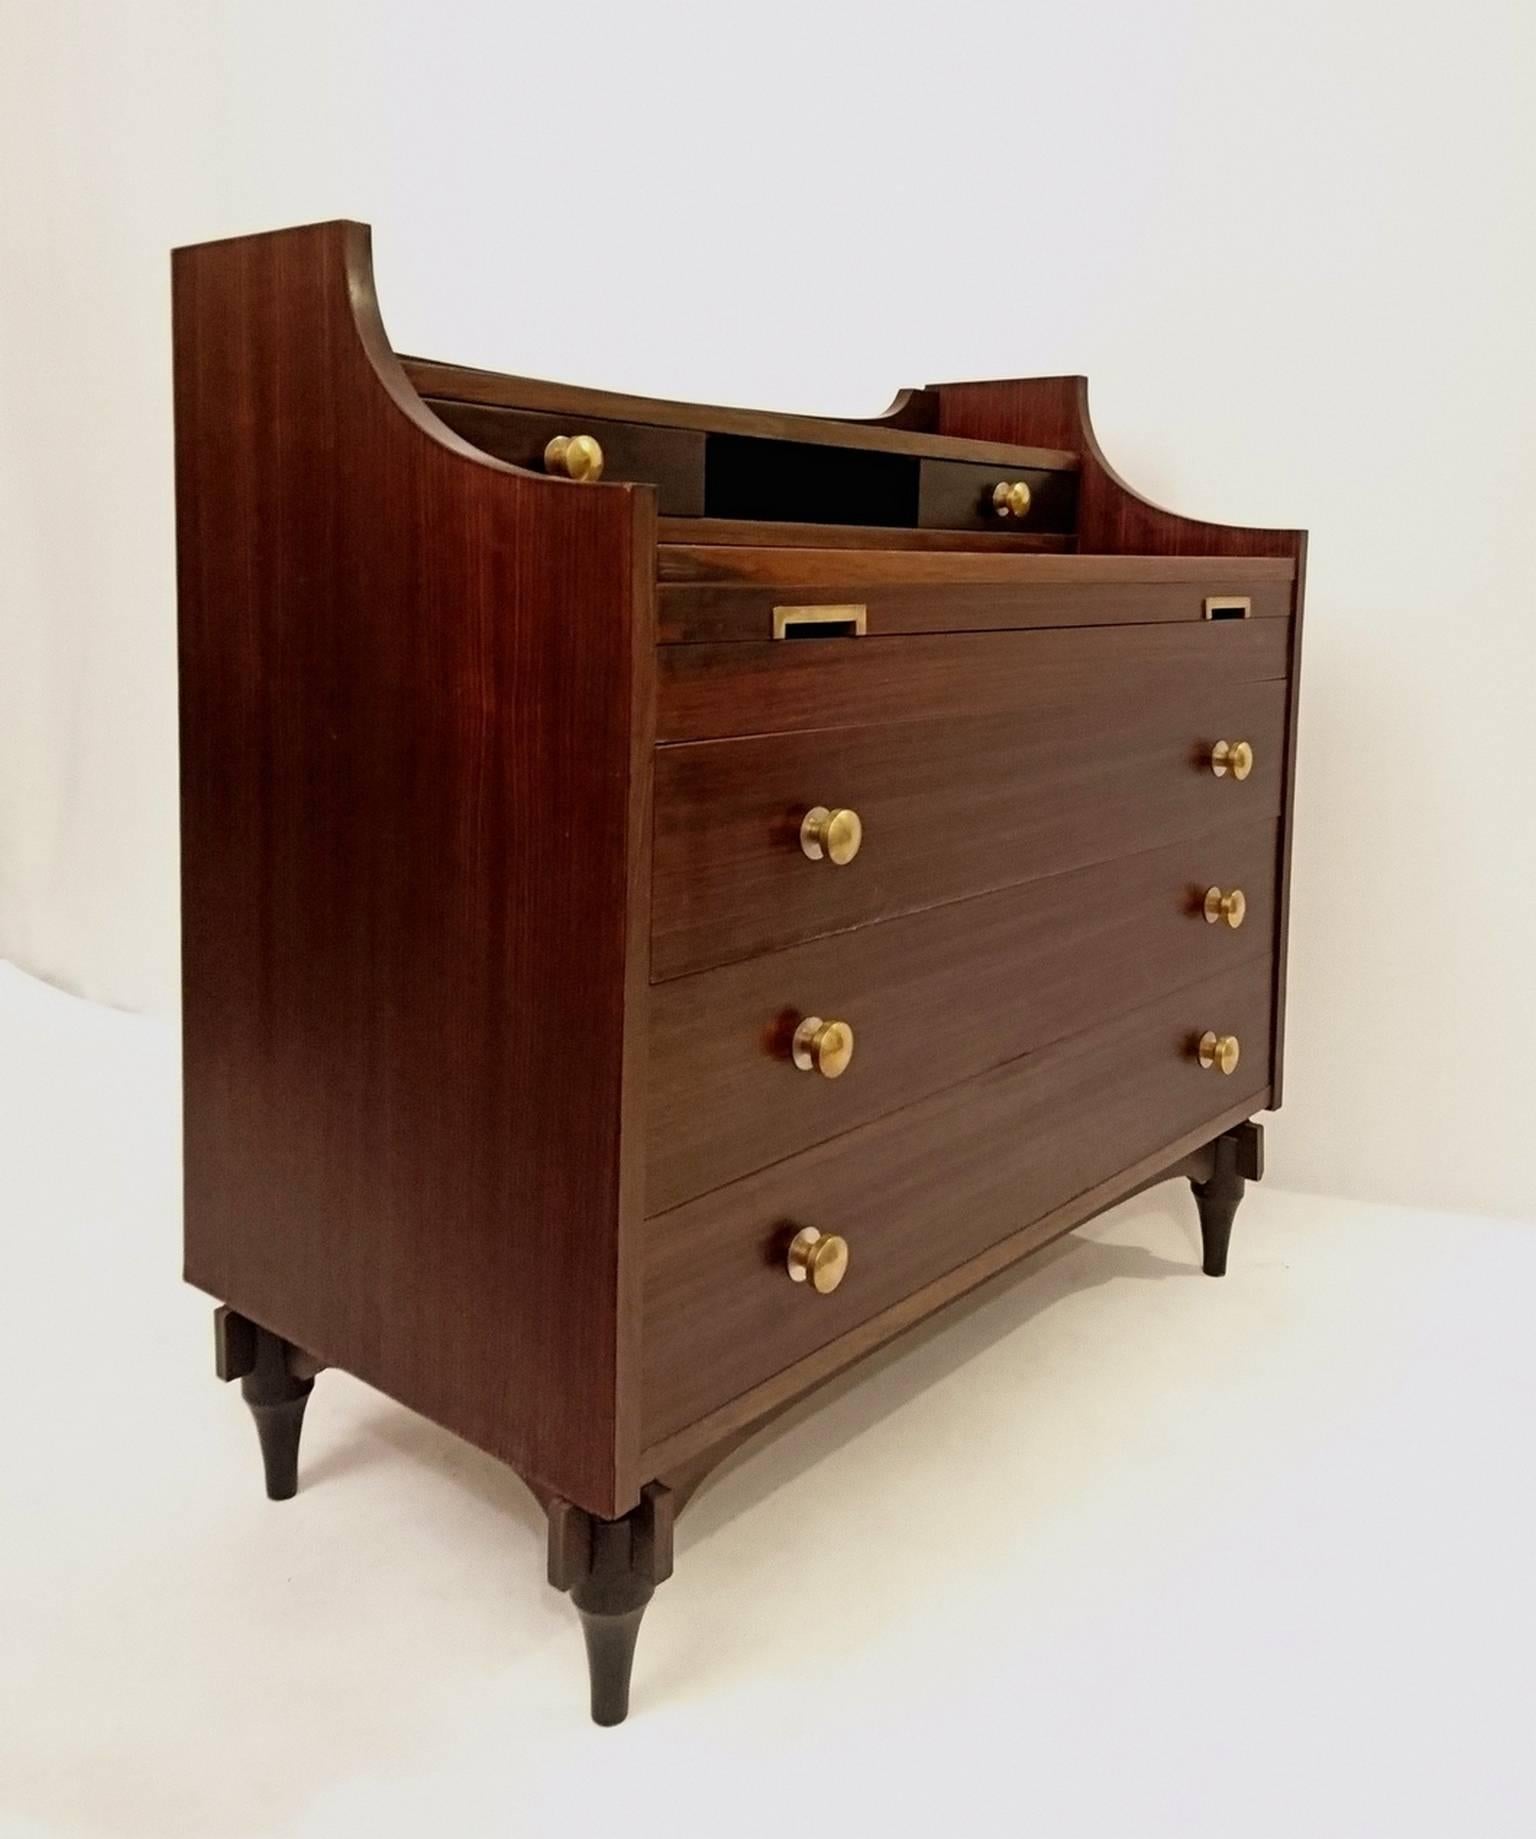 Mid-20th Century Dresser with vanity mirror by Claudio Salocchi for Sormani, Model SC284